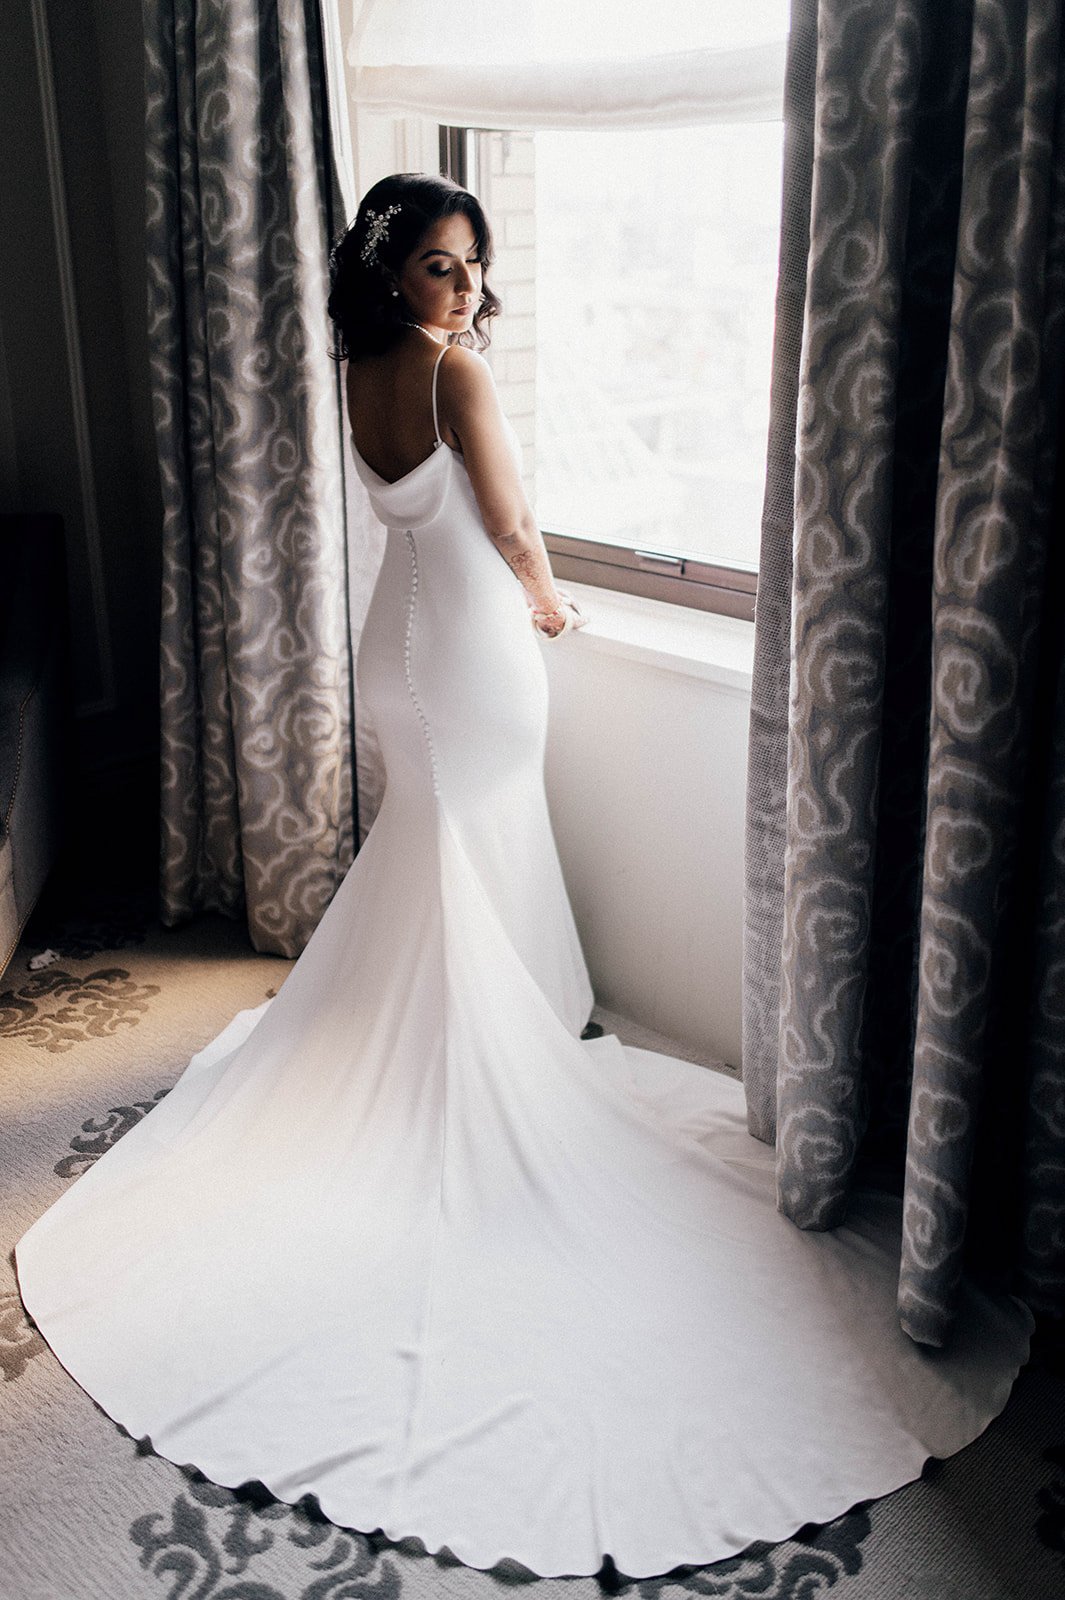 A bride in a long white gown looks over her shoulder as window light streams in.